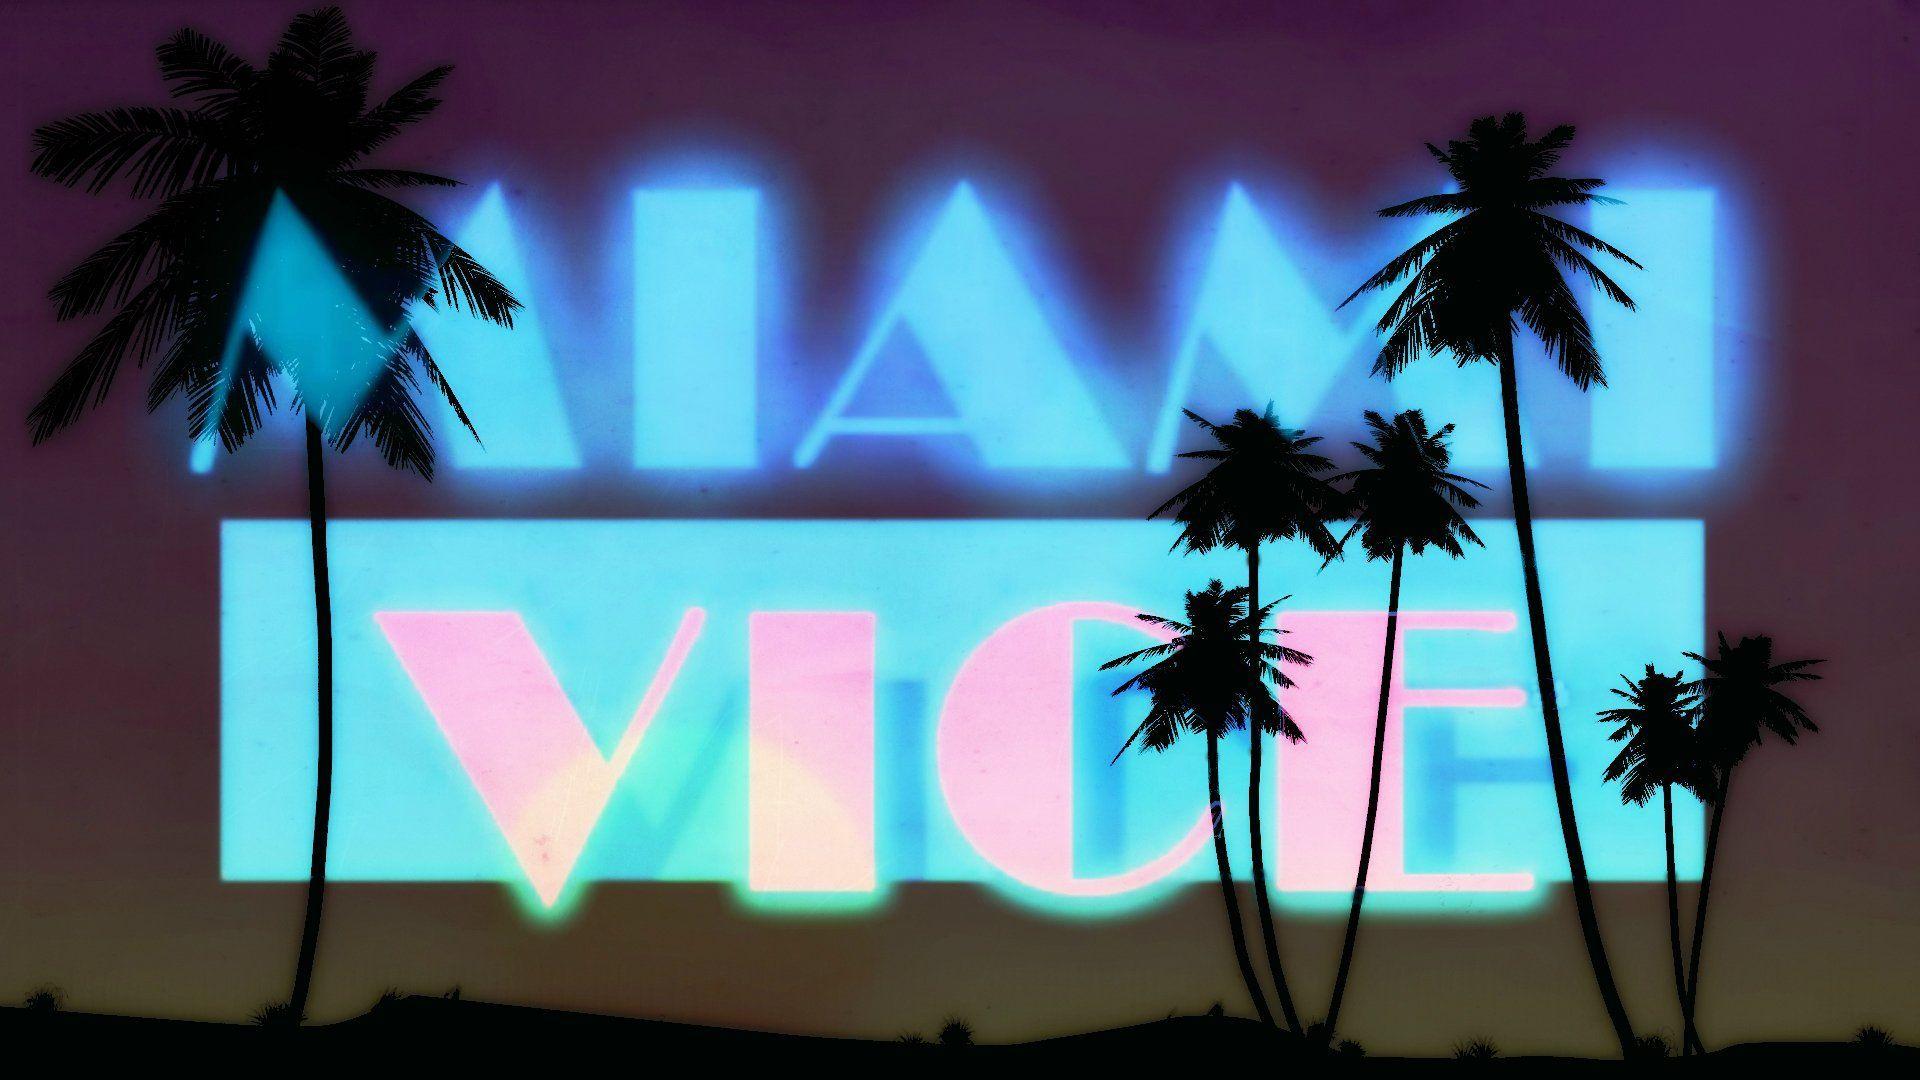 Miami Vice Hd Wallpapers Top Free Miami Vice Hd Backgrounds Wallpaperaccess